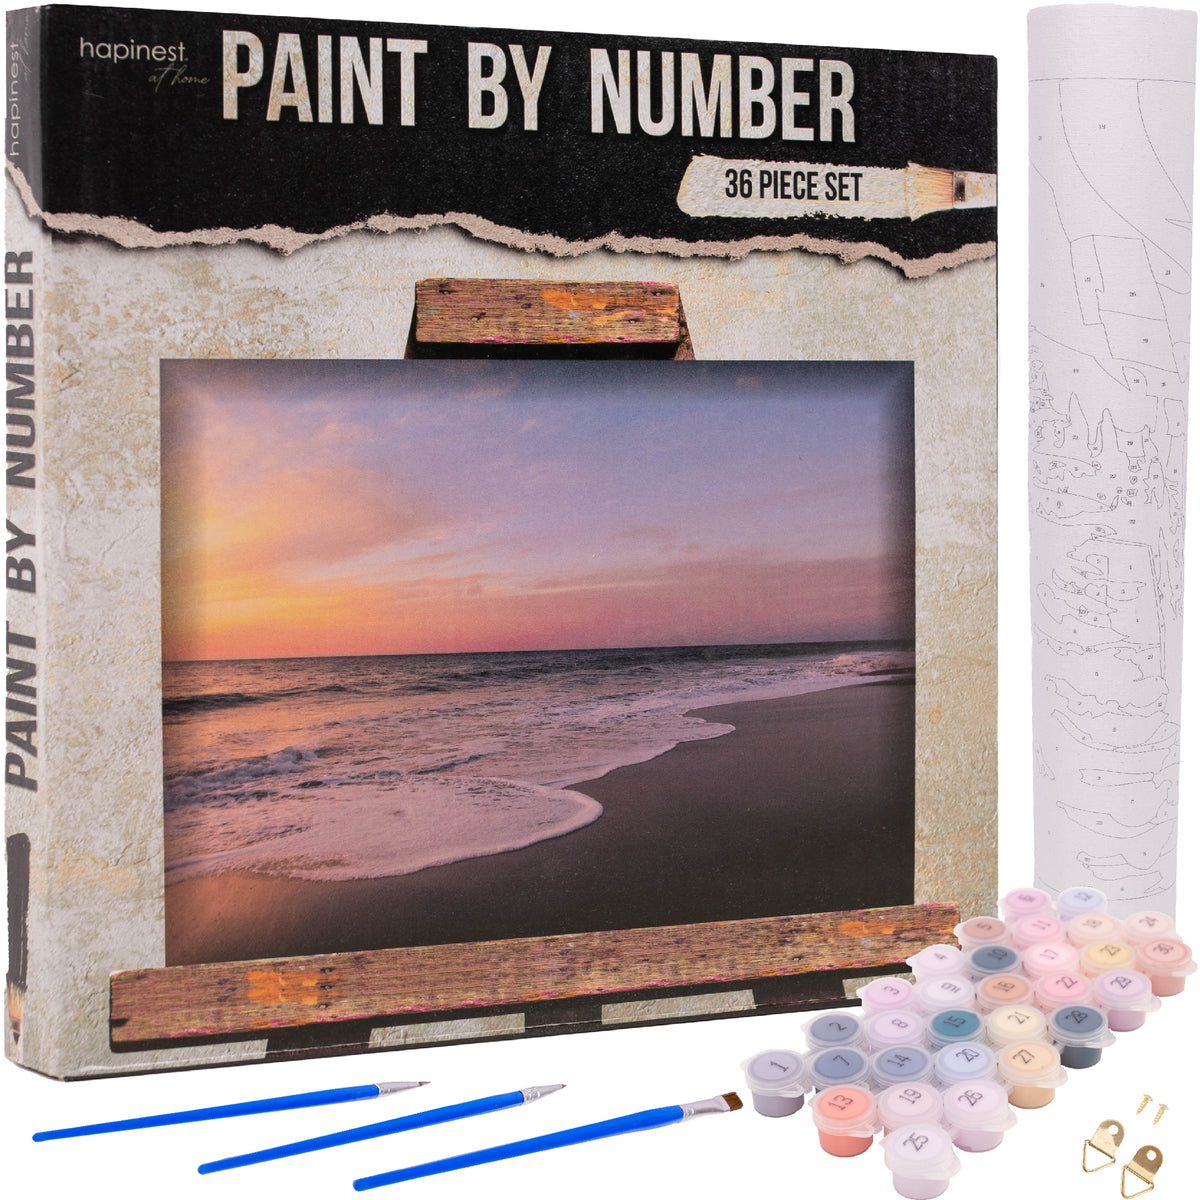 MXCFZX Landscape Paint by Numbers for Adults - DIY Adult Paint by Number Kits Pack on Canvas Sunset Beach Painting by Numbers for Beginners,Acrylic